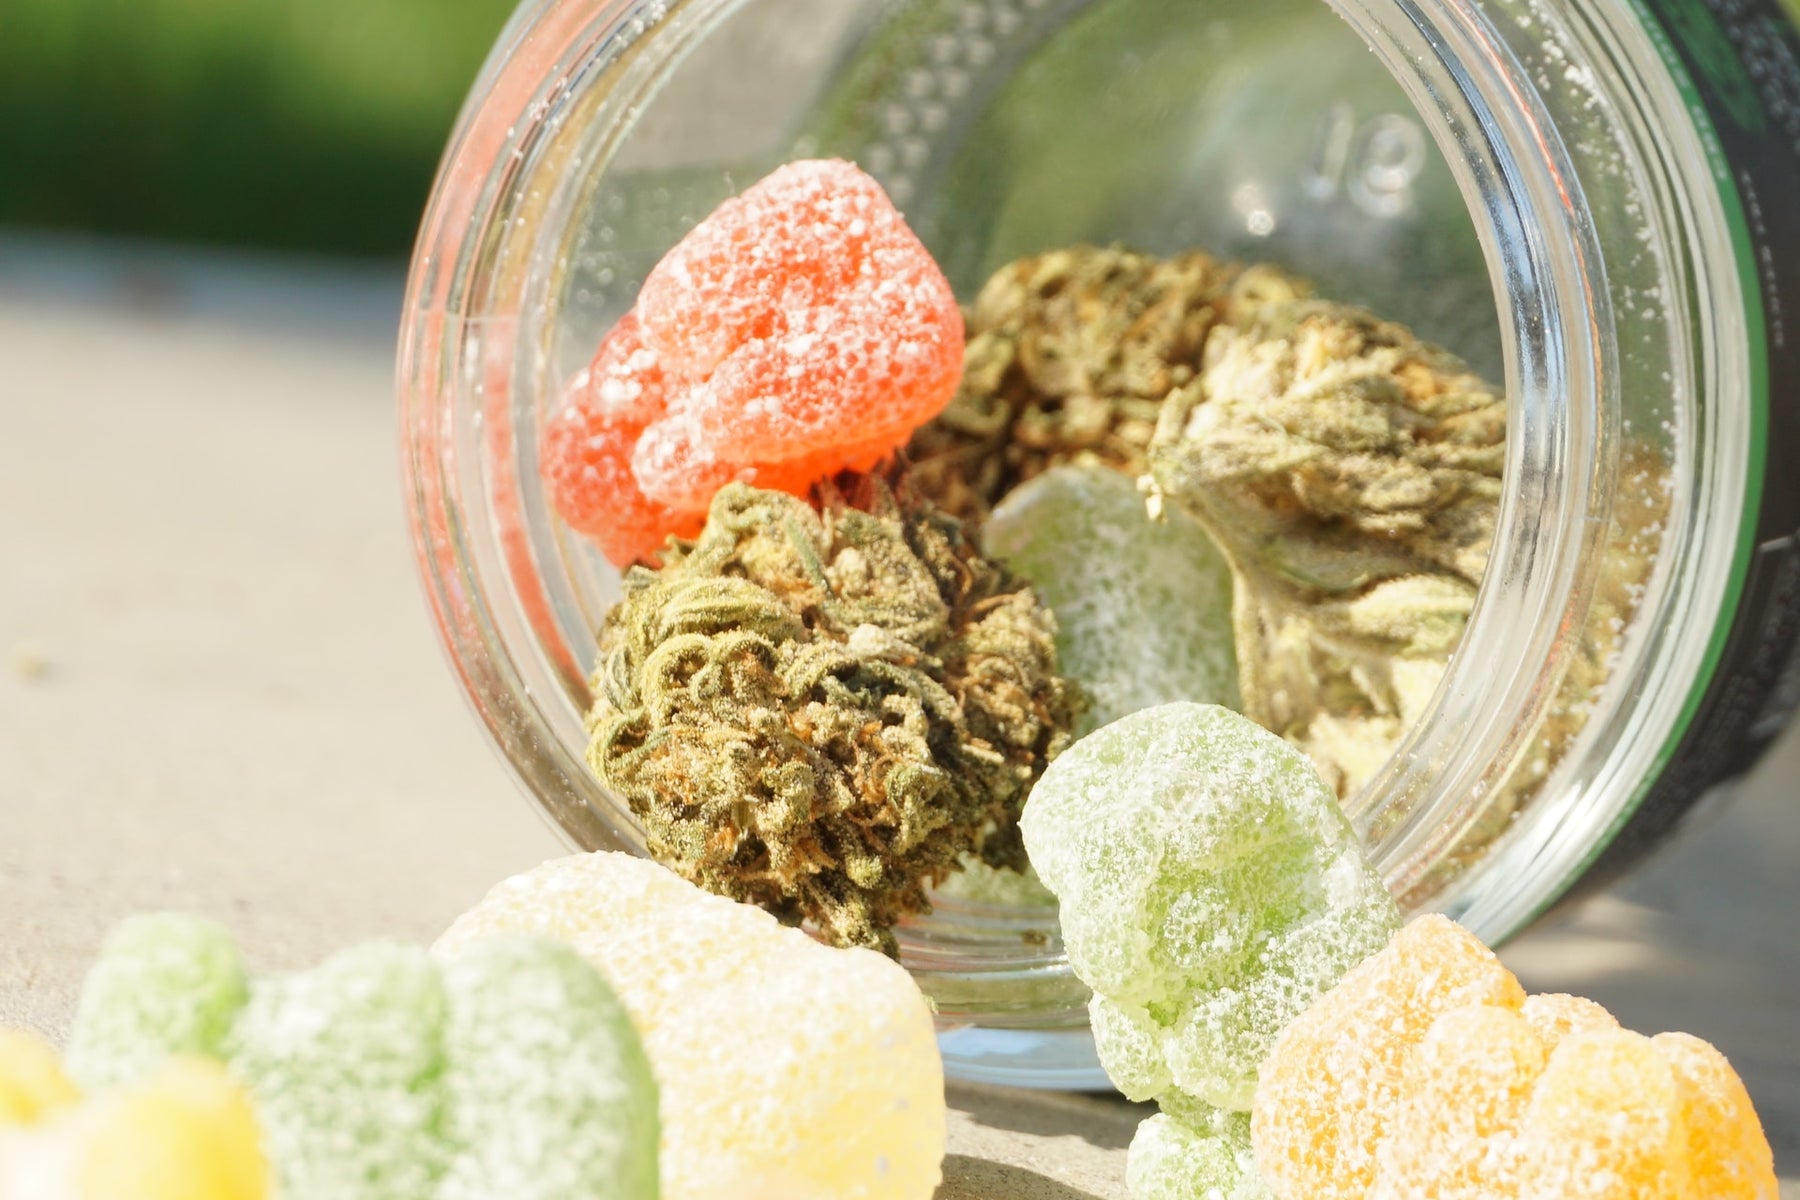 A Guide to Crafting Tasty, Responsible, and Legal Cannabis-Infused Edibles